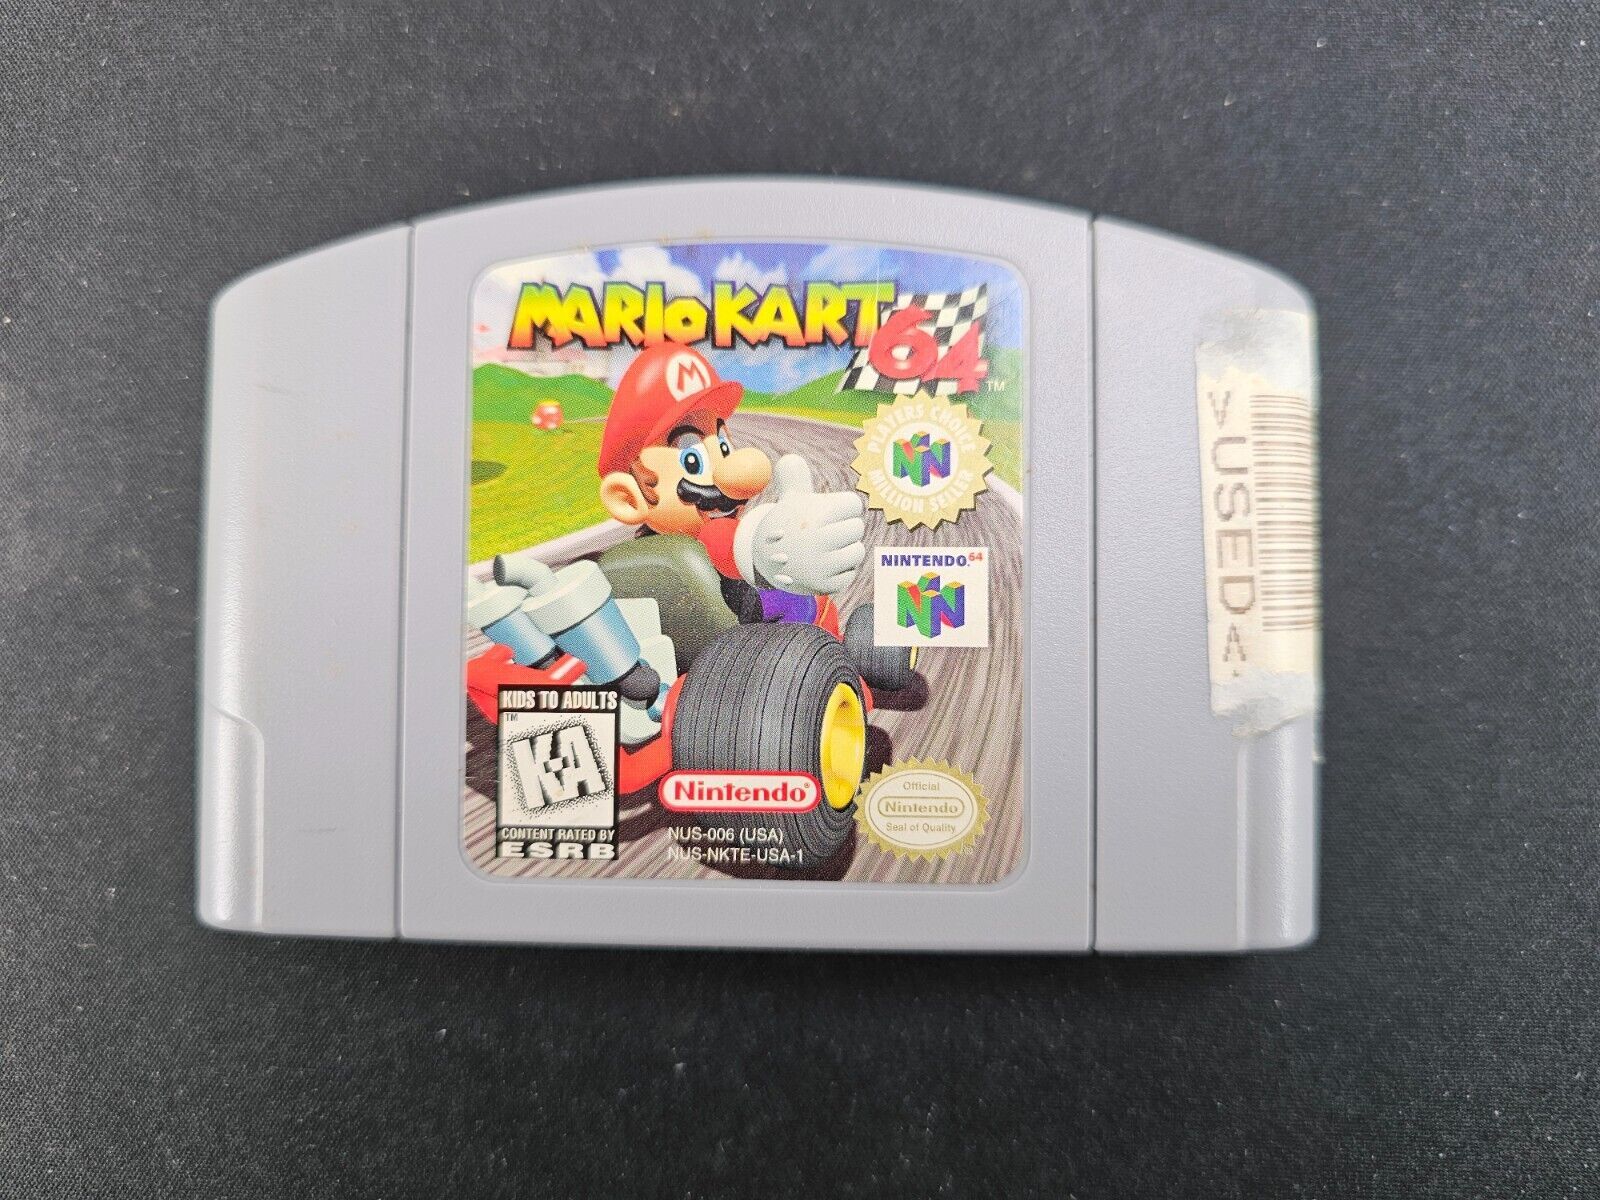 Primary image for Mario Kart Nintendo 64 Original Authentic Game Cartridge N64 Tested, Working